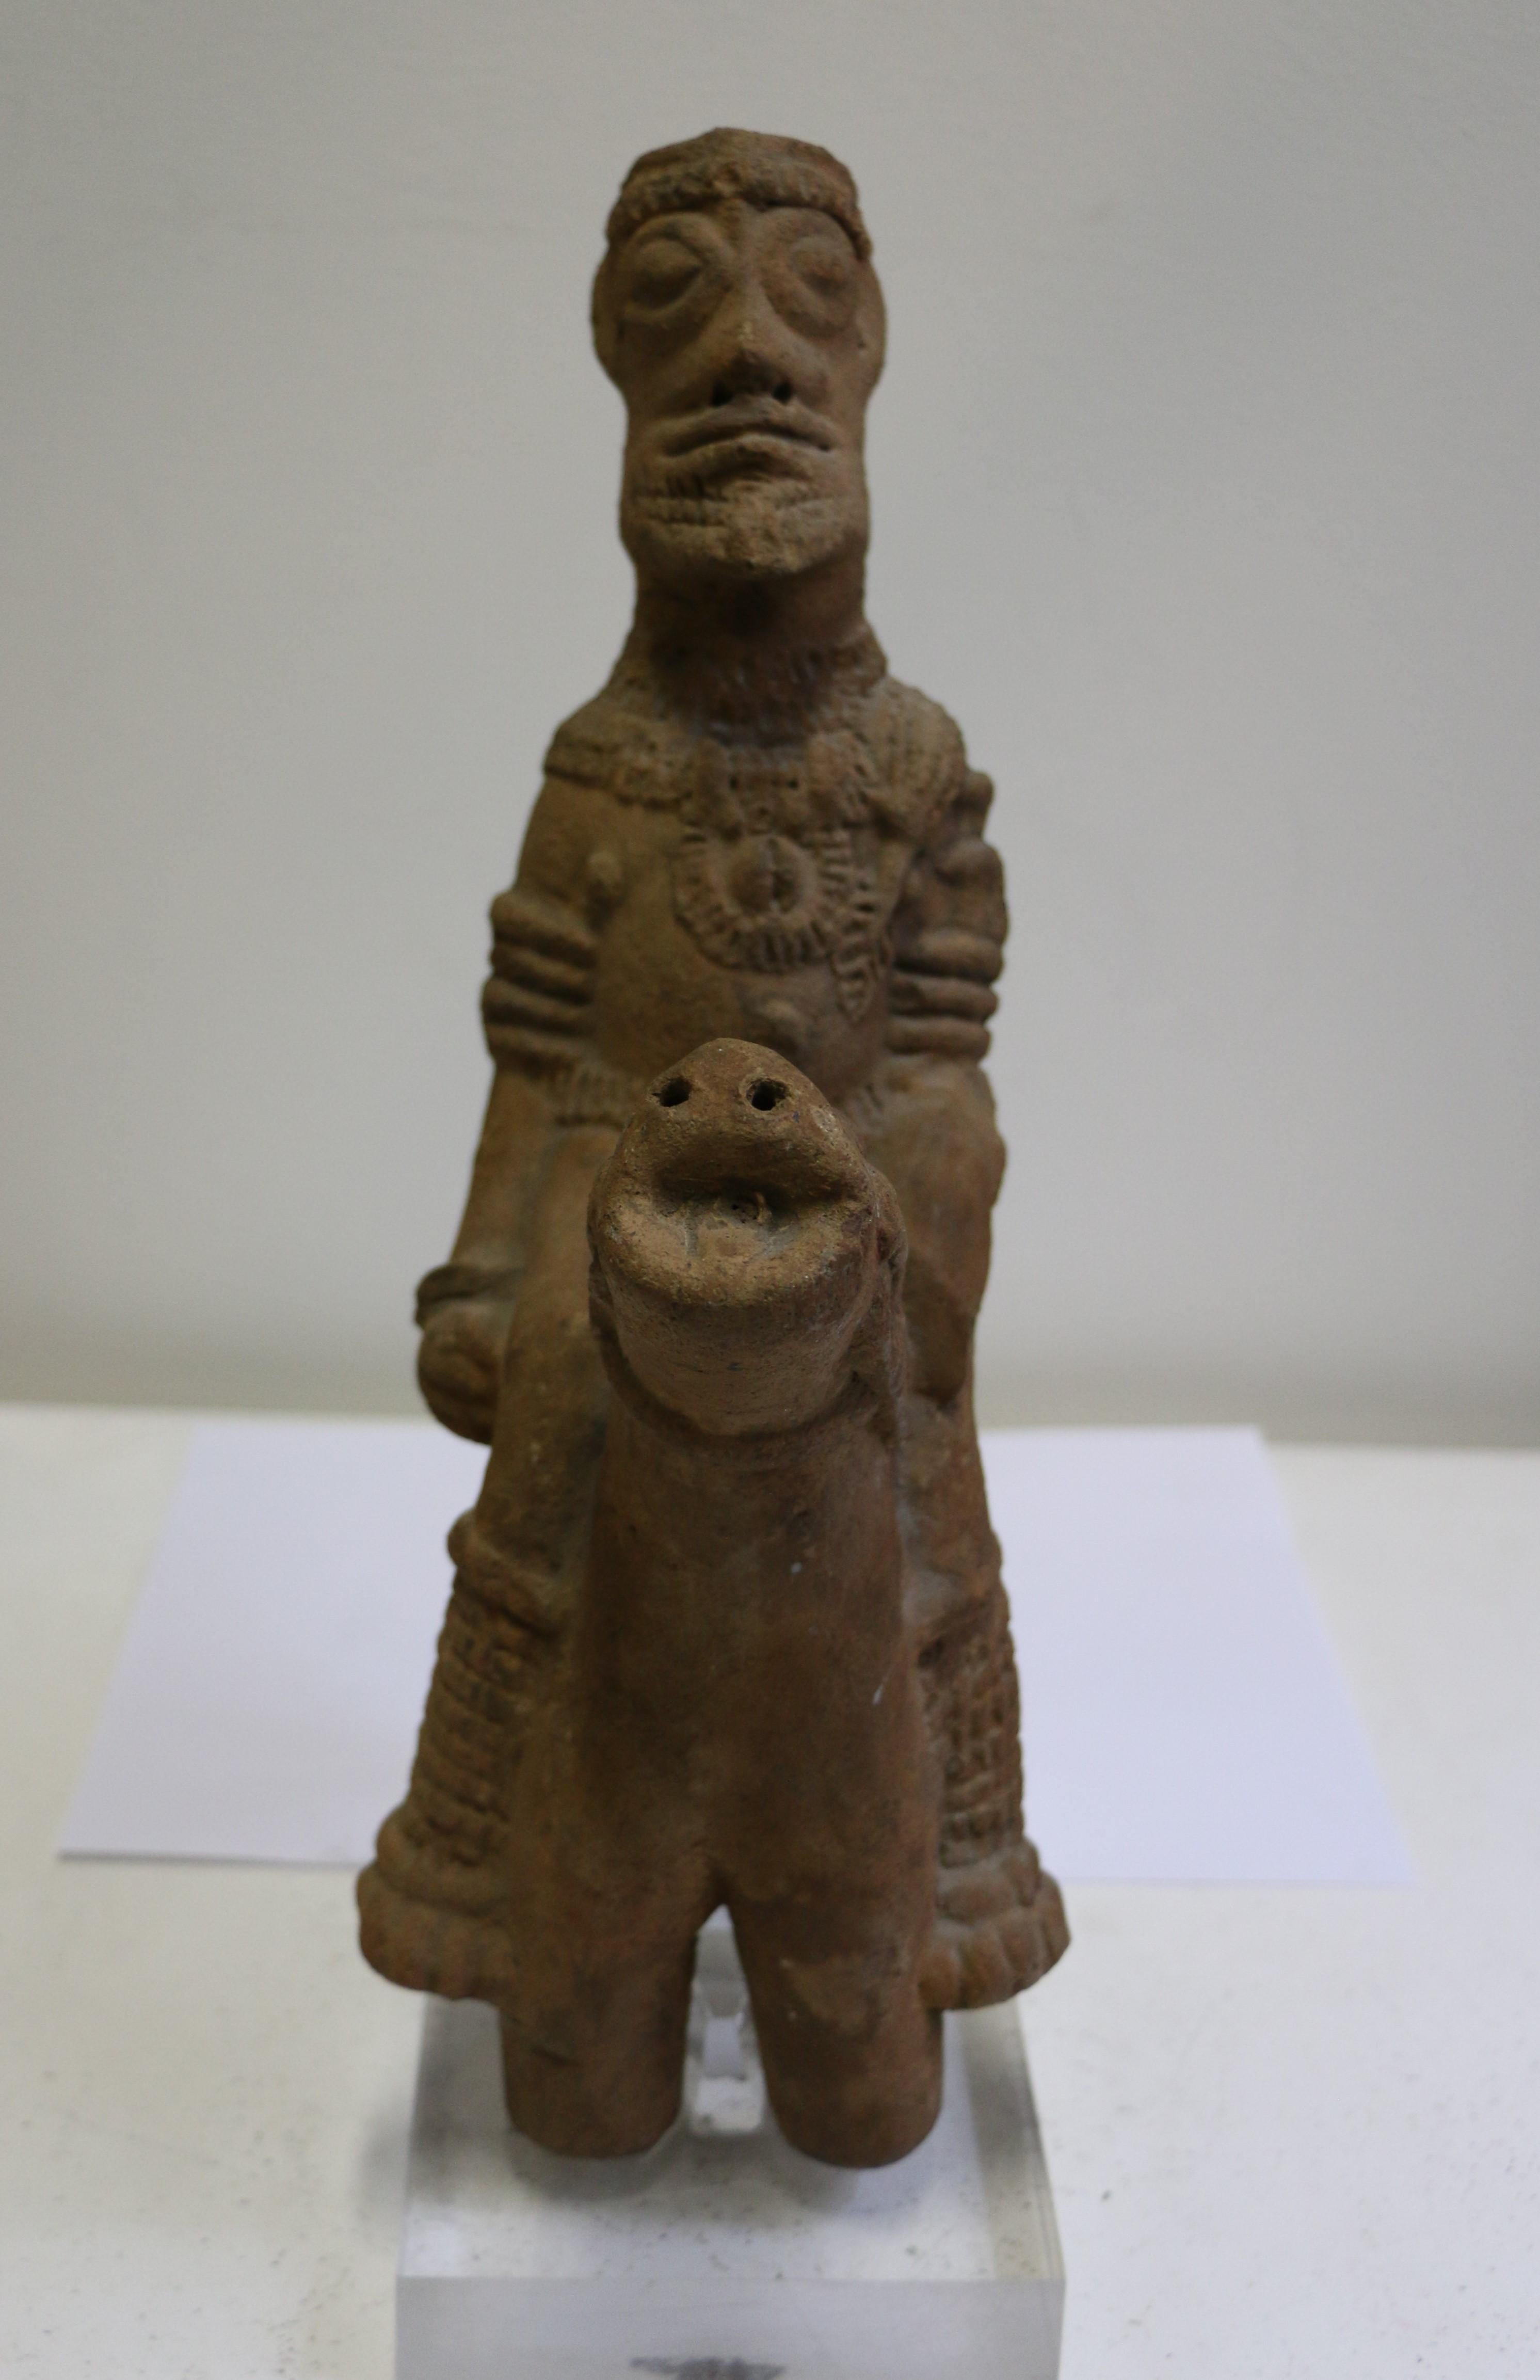 Exceptional antique African Tribal Art terracotta sculpture representing a rider on his horse. It dates back from the 14th -15th century AD and its dating has been confirmed by a thermoluminescence test (Interexpert certificate 388317, 18 March